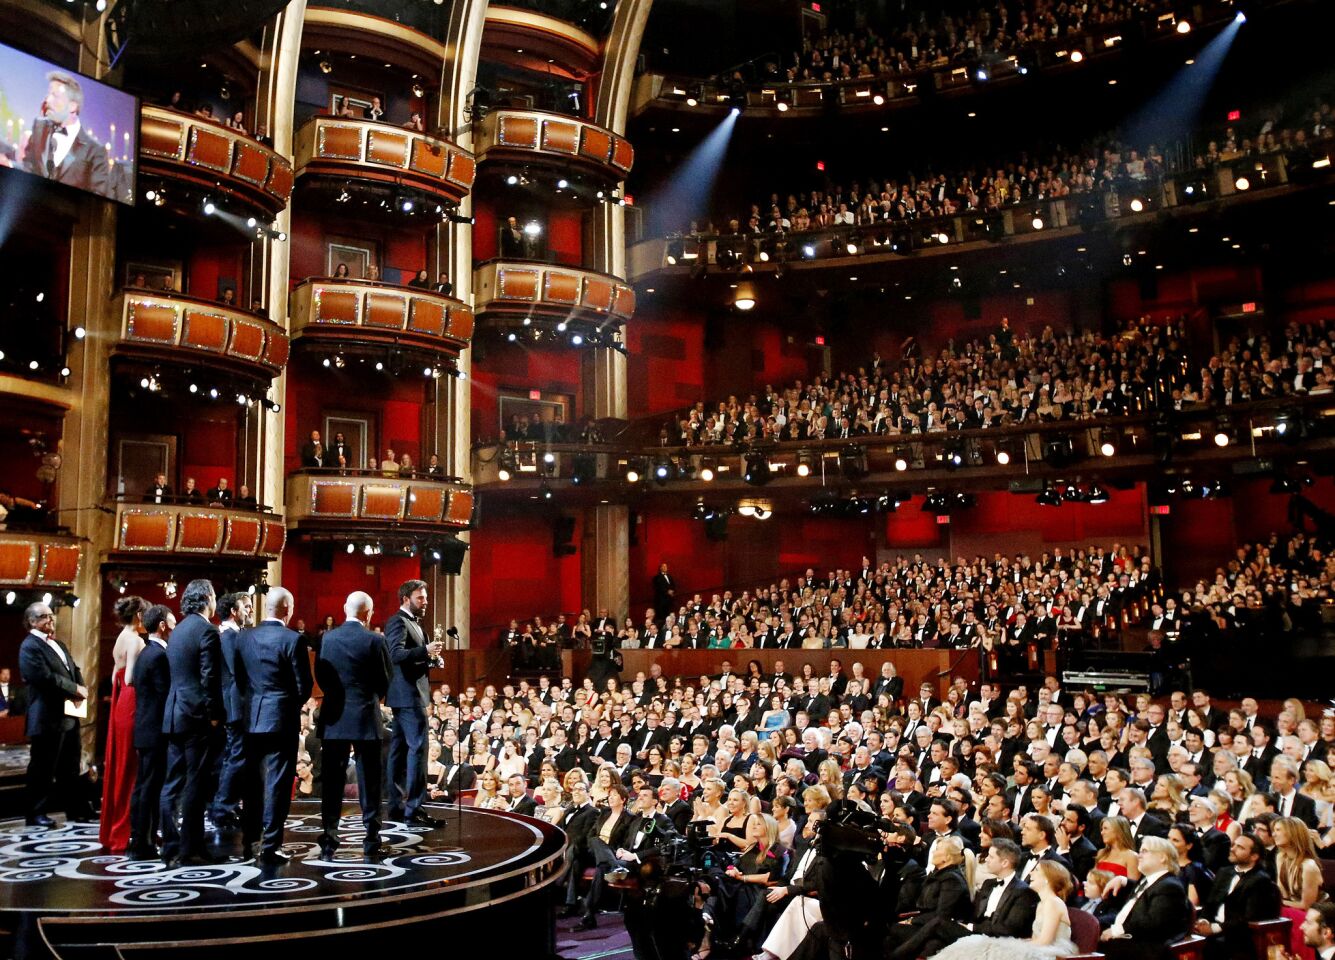 The cast and crew of best picture "Argo" at the 85th Academy Awards.